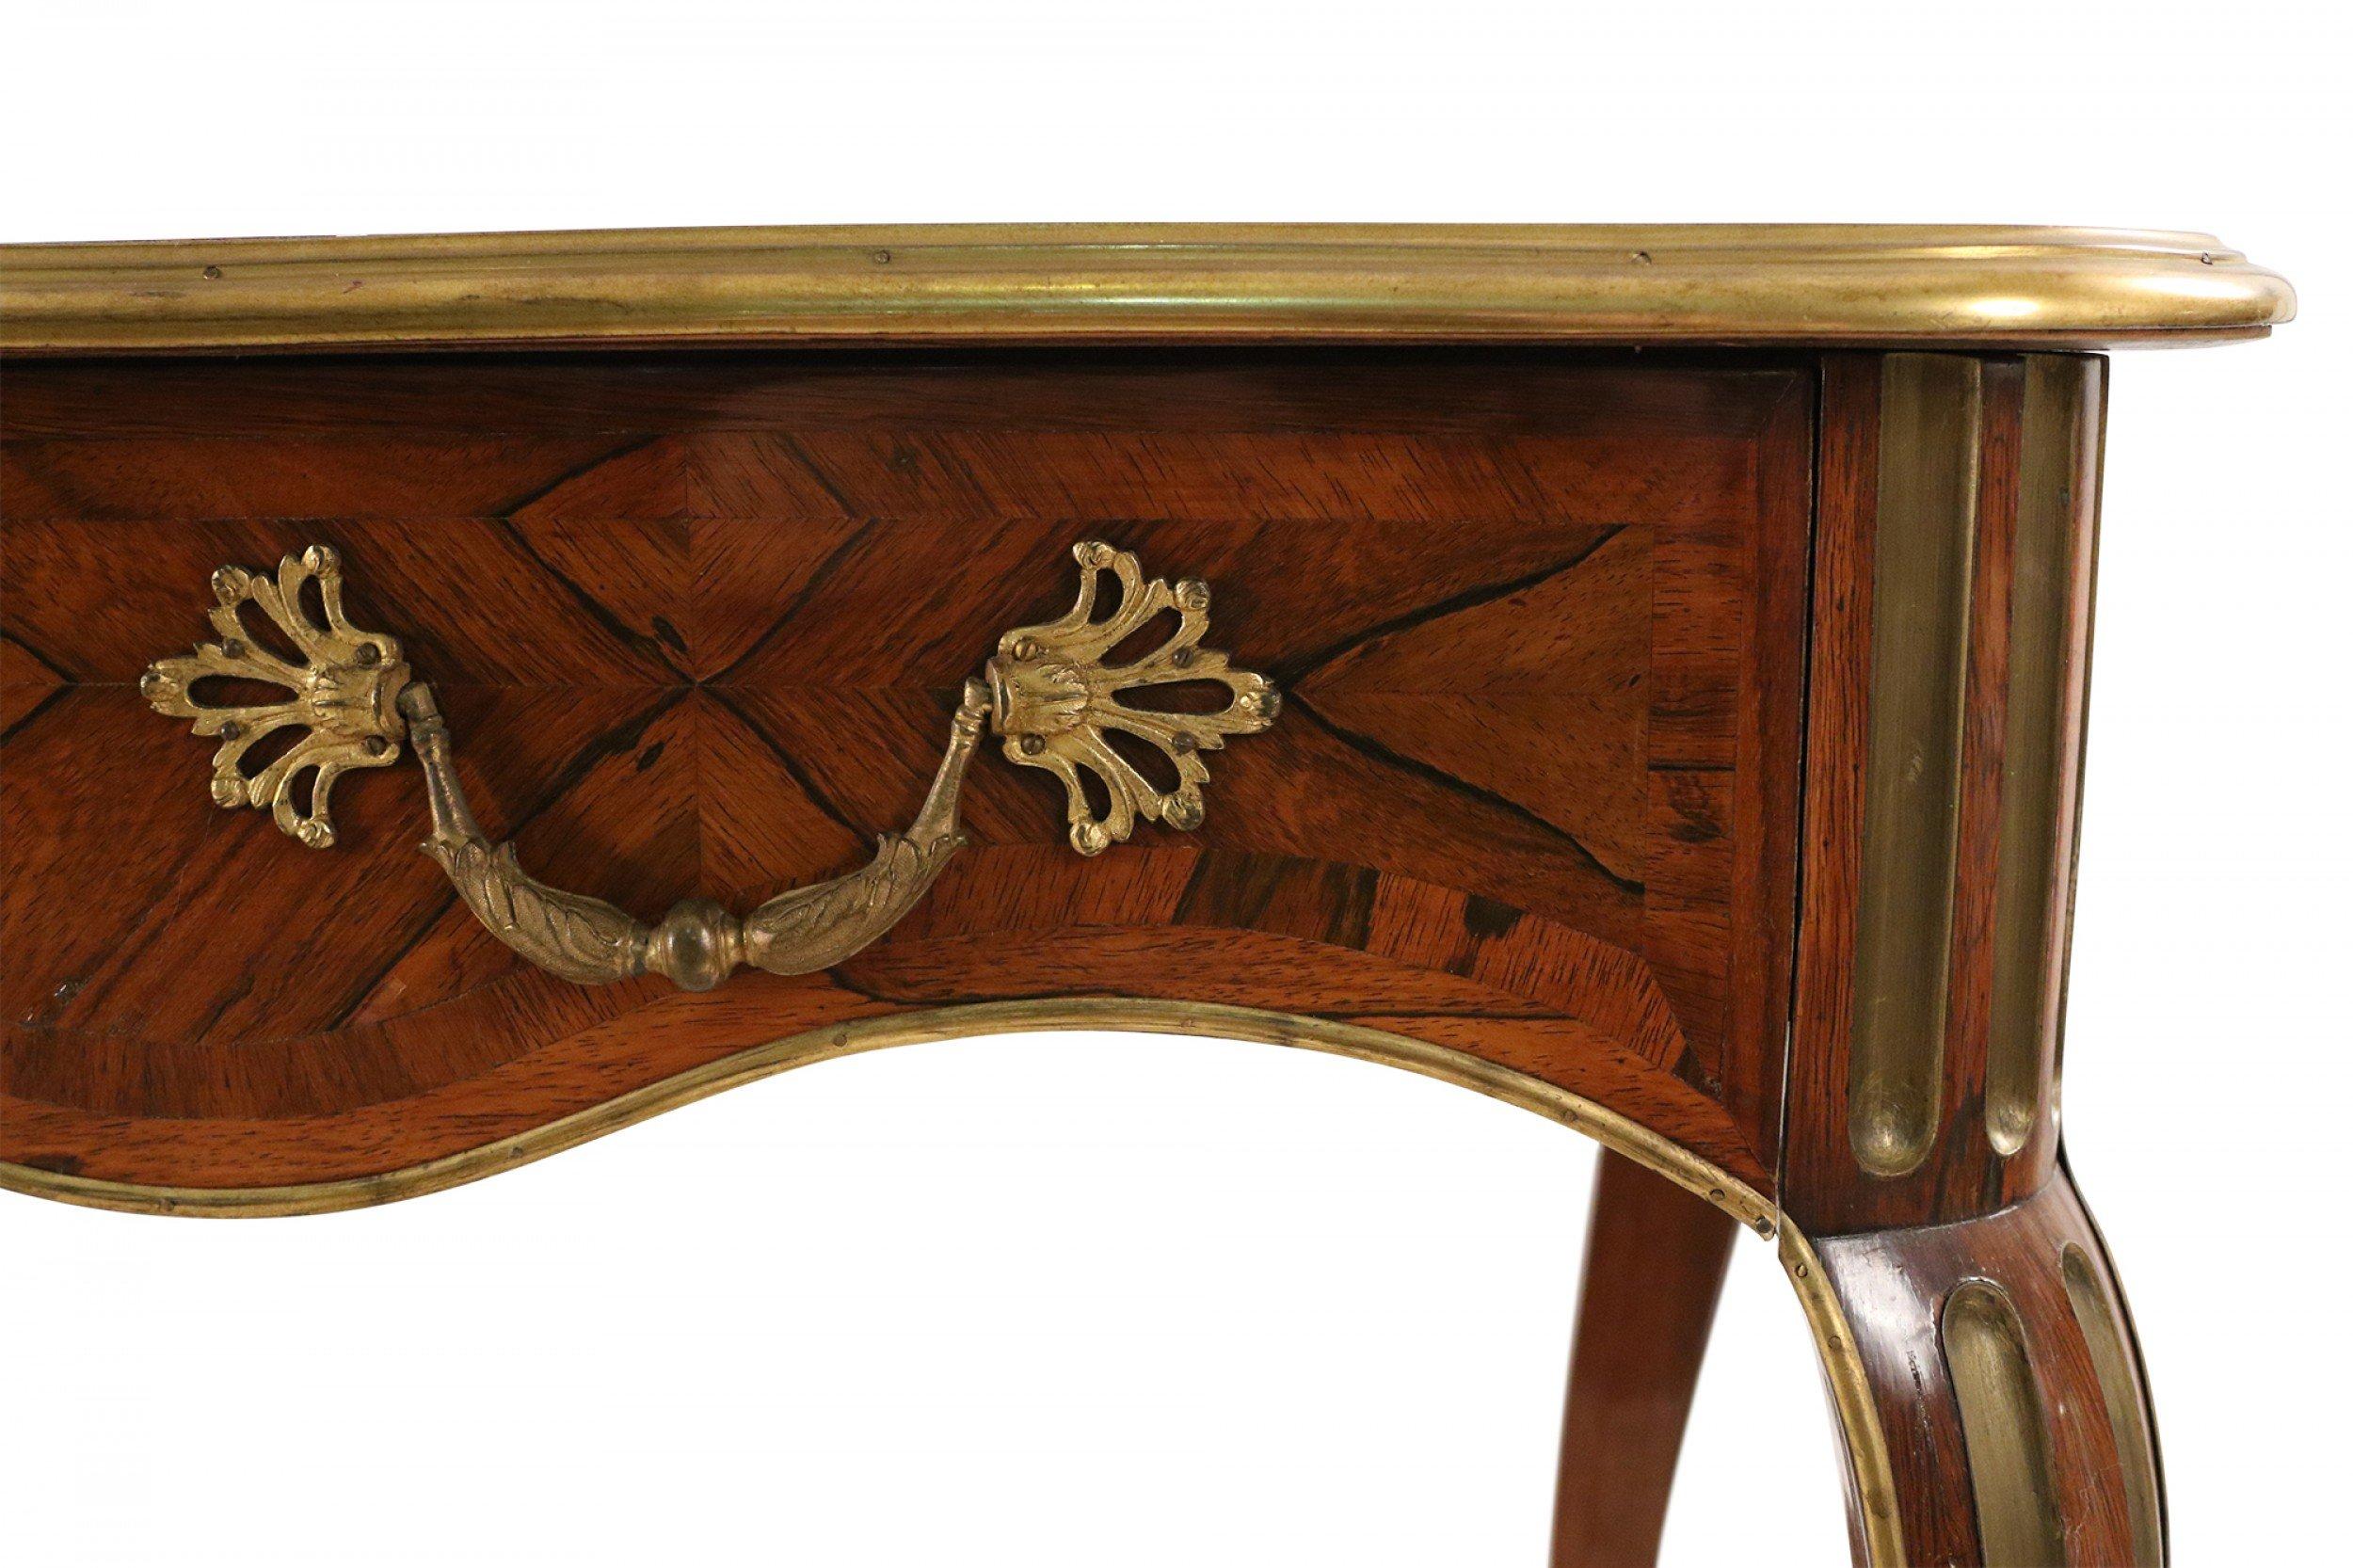 19th Century French Louis XV Style Kingwood Veneer Desk with Leather Top and Brass Hardware For Sale